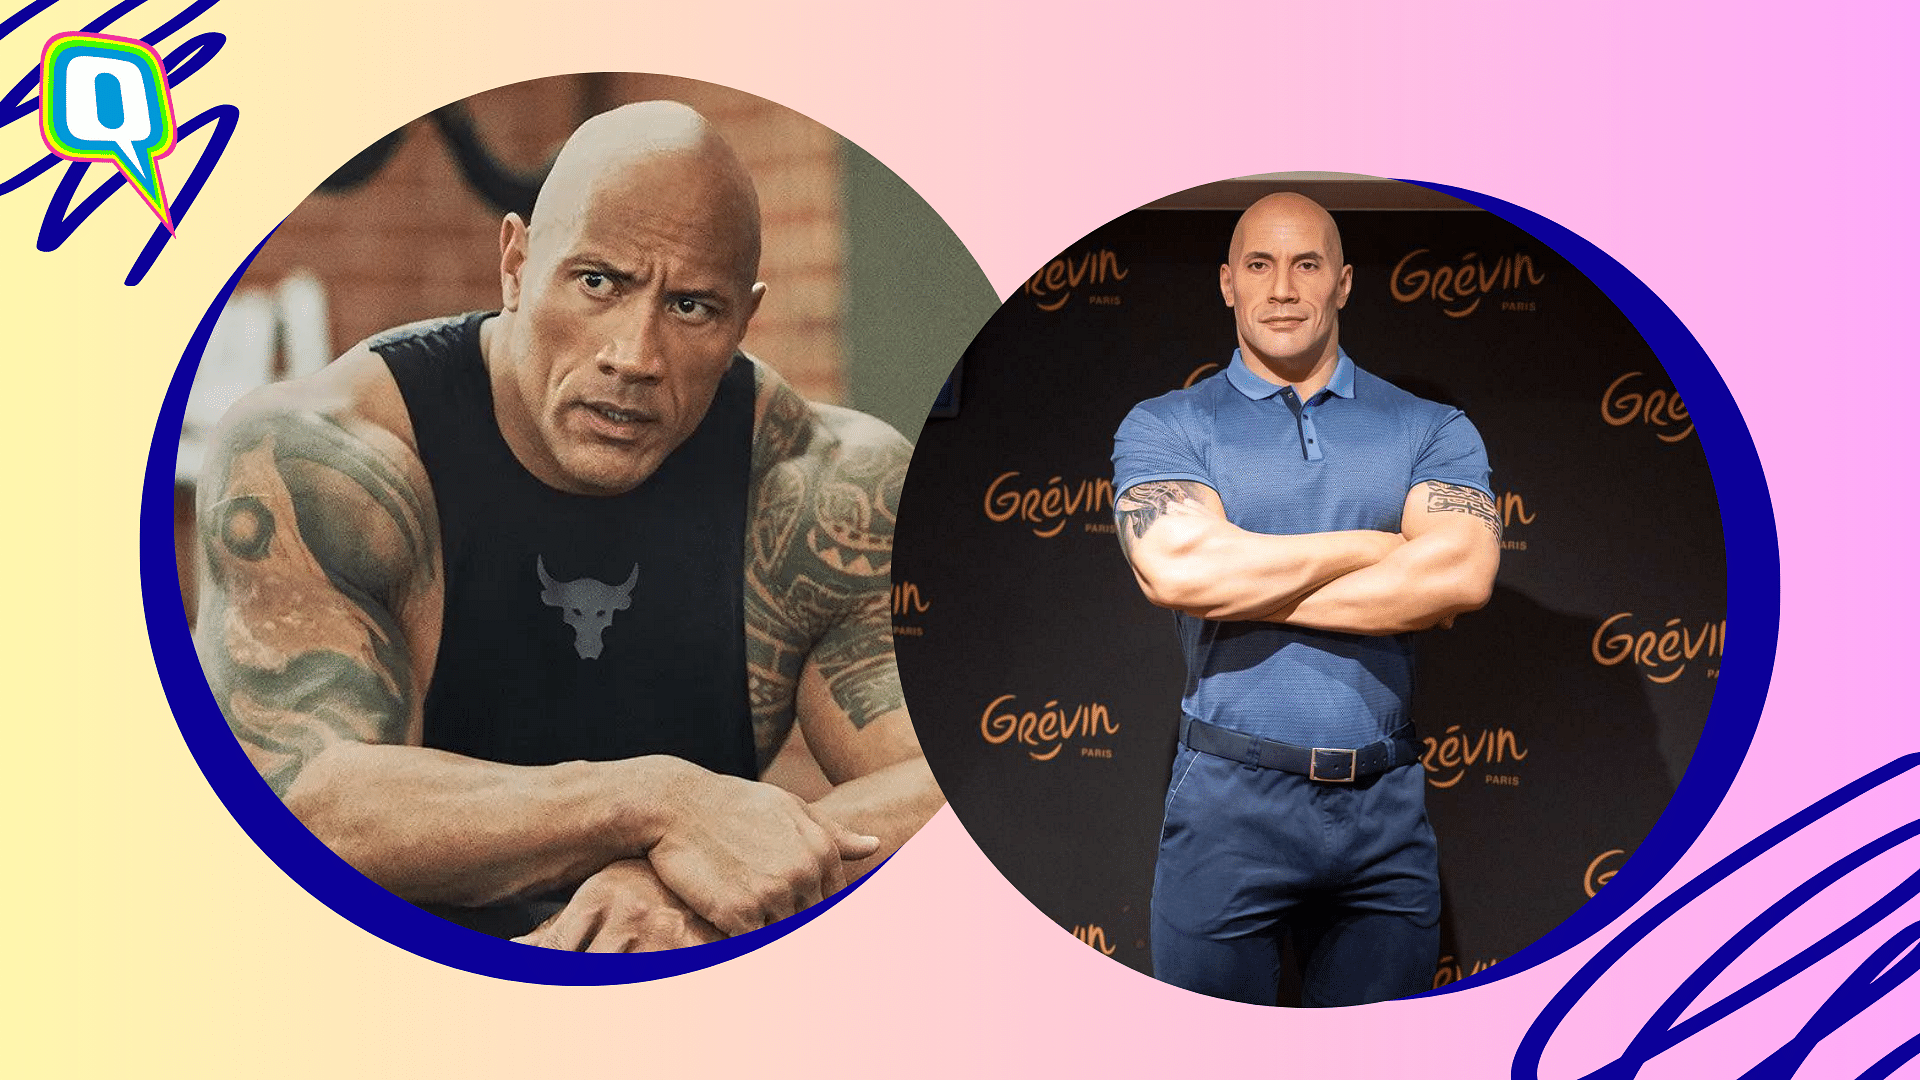 <div class="paragraphs"><p>French Museum Corrects Skin Tone Of The Rock's Wax Figure After Online Criticism</p></div>